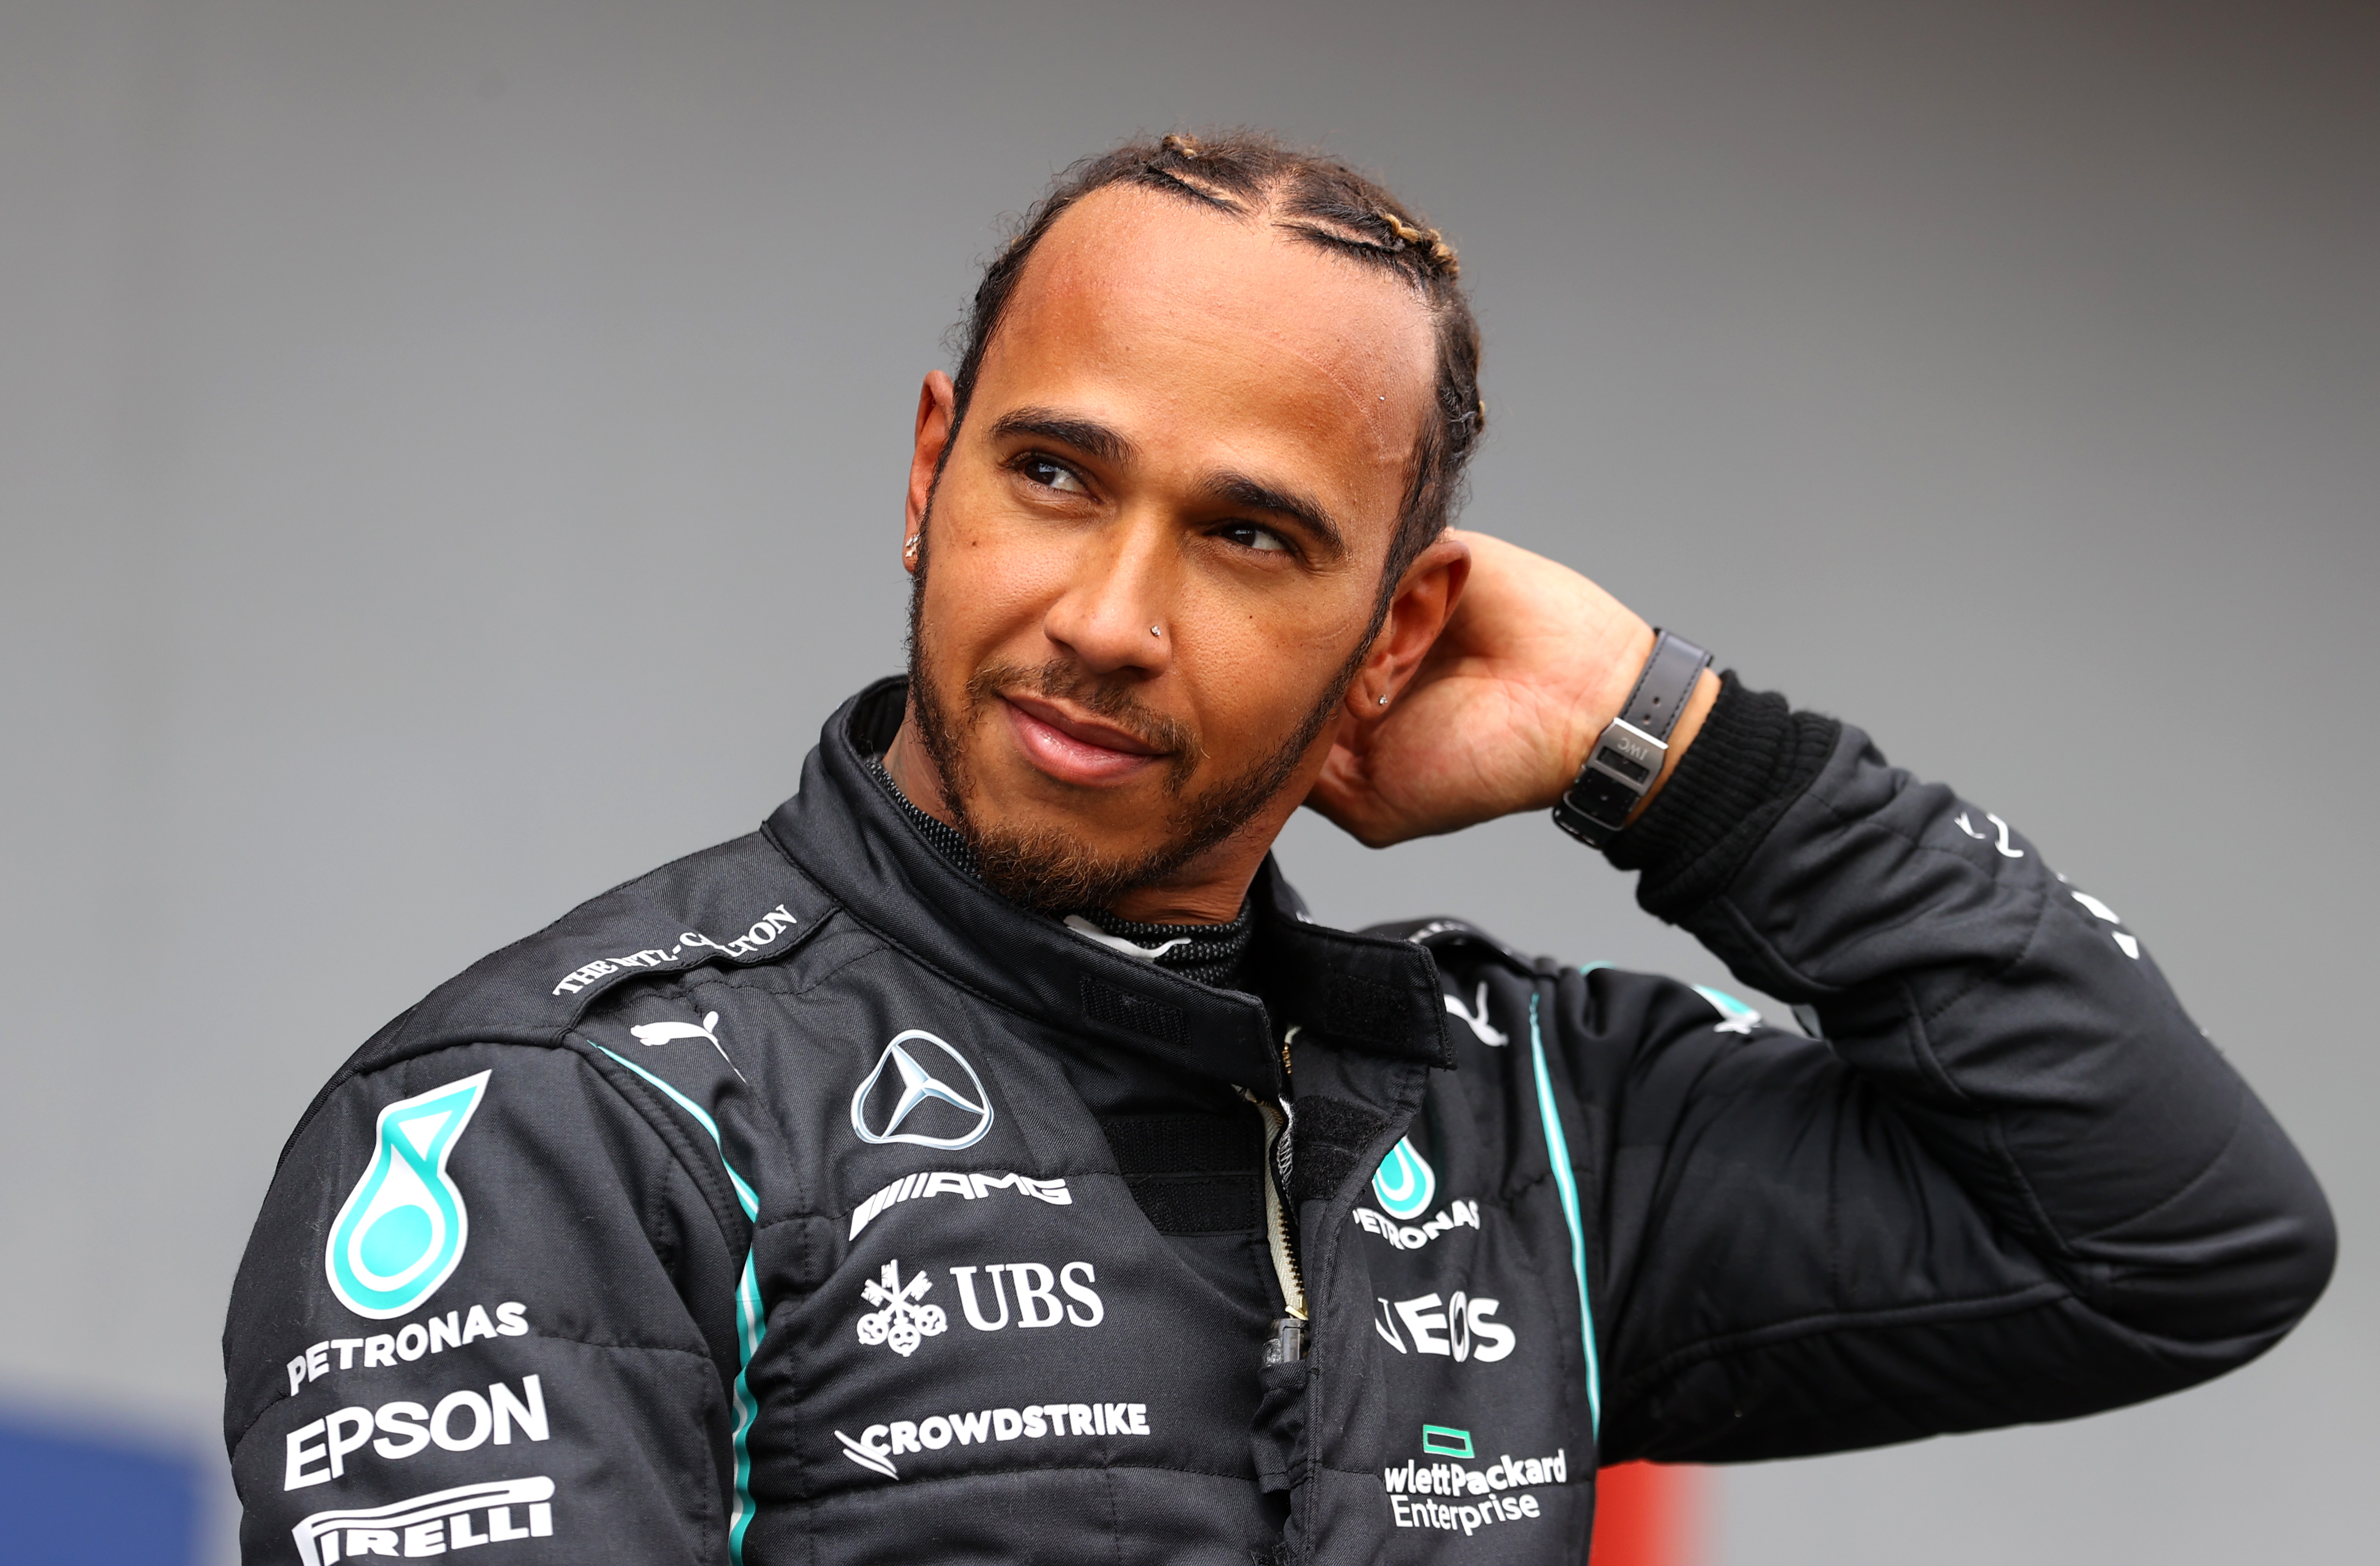 Lewis Hamilton of Mercedes GP looks on in parc ferme during qualifying ahead of the F1 Grand Prix of Emilia Romagna in Italy